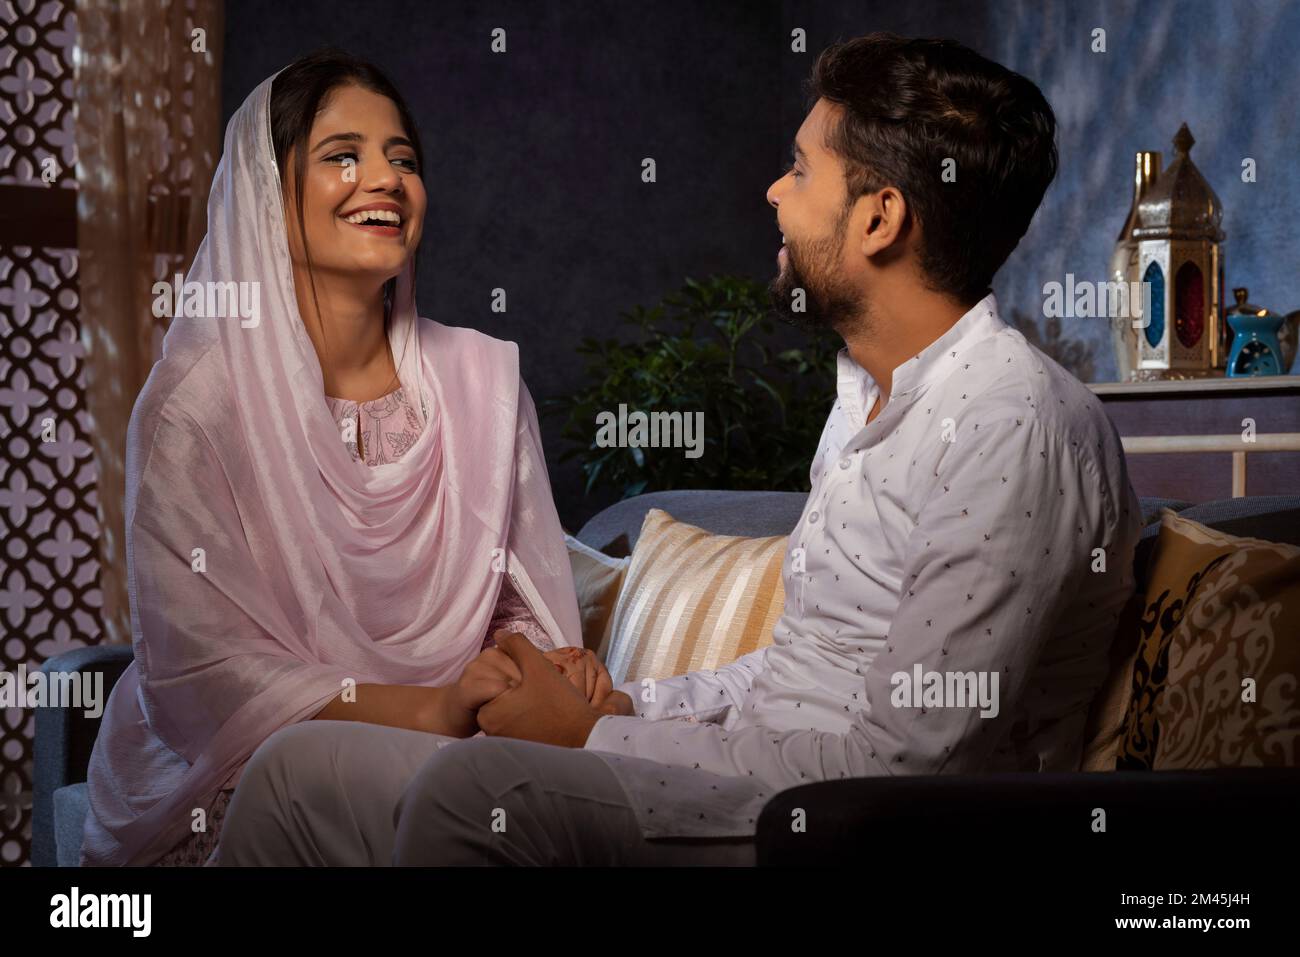 Romantic Muslim couple holding hands and looking at each other in living room Stock Photo